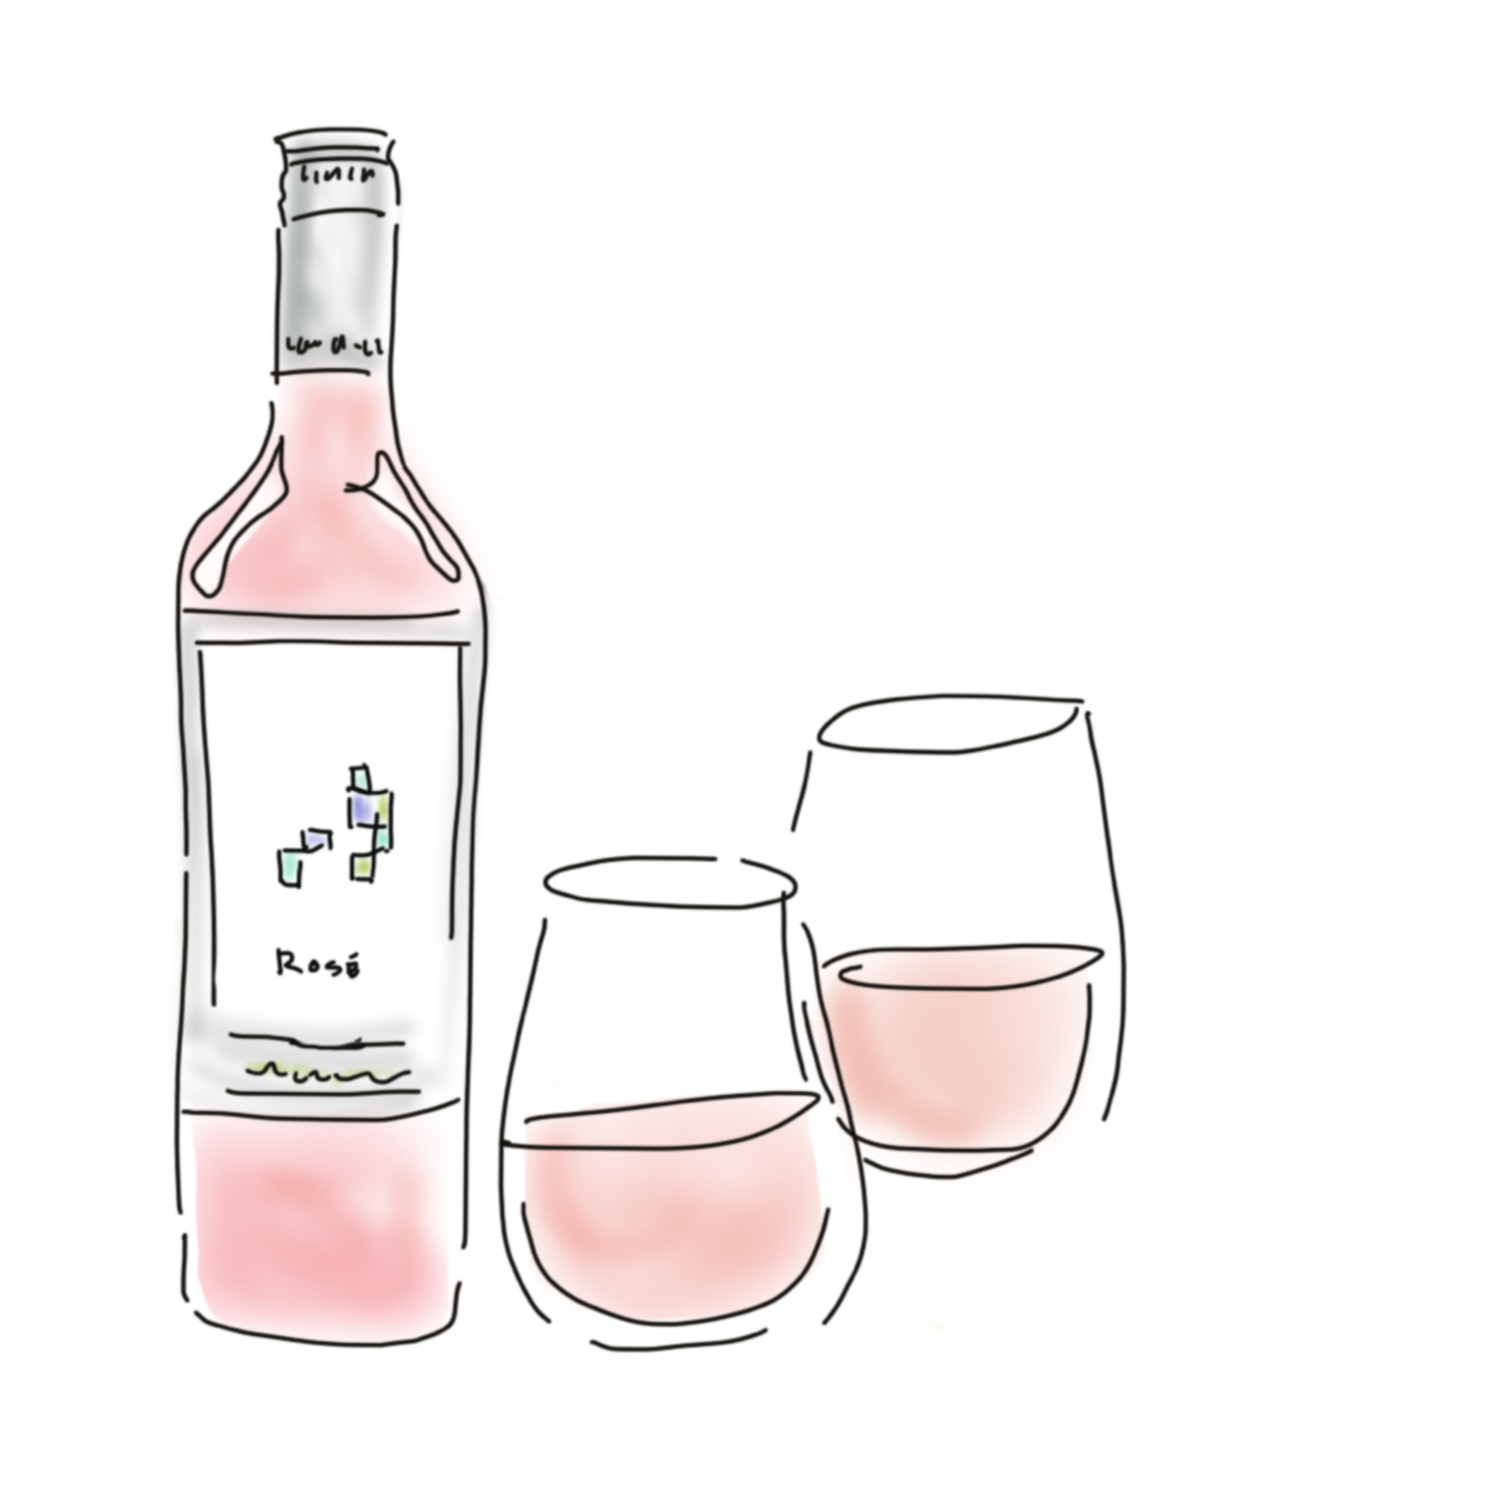 Wine Bottle Clipart Rose and other clipart images on Cliparts pub ™.